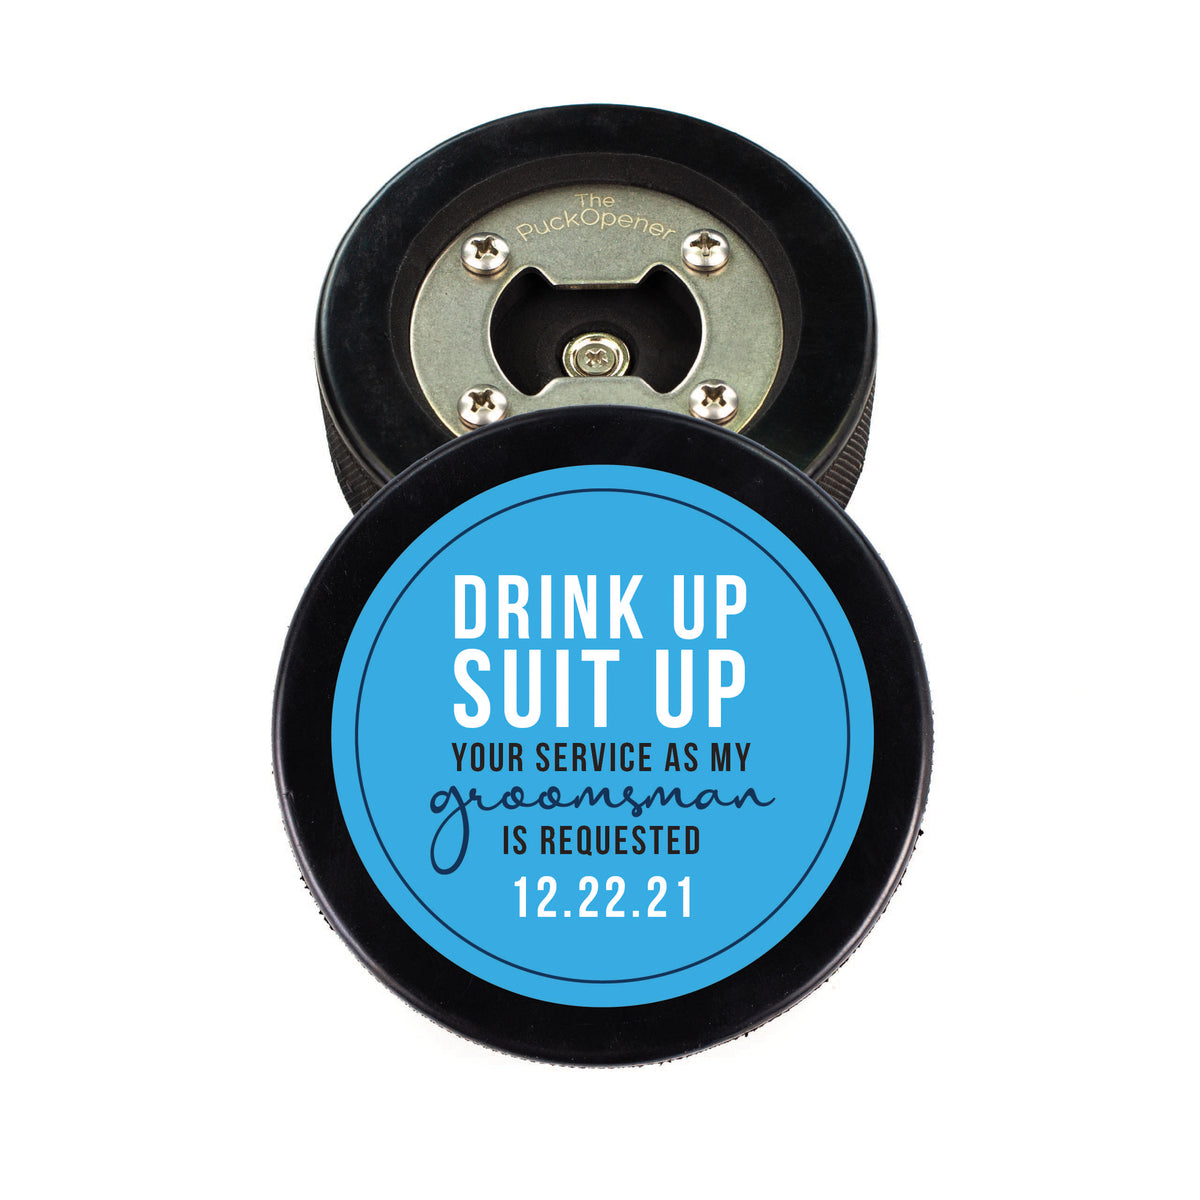 Hockey Puck Bottle Opener with Drink Up Suit Up Personalization Text Design